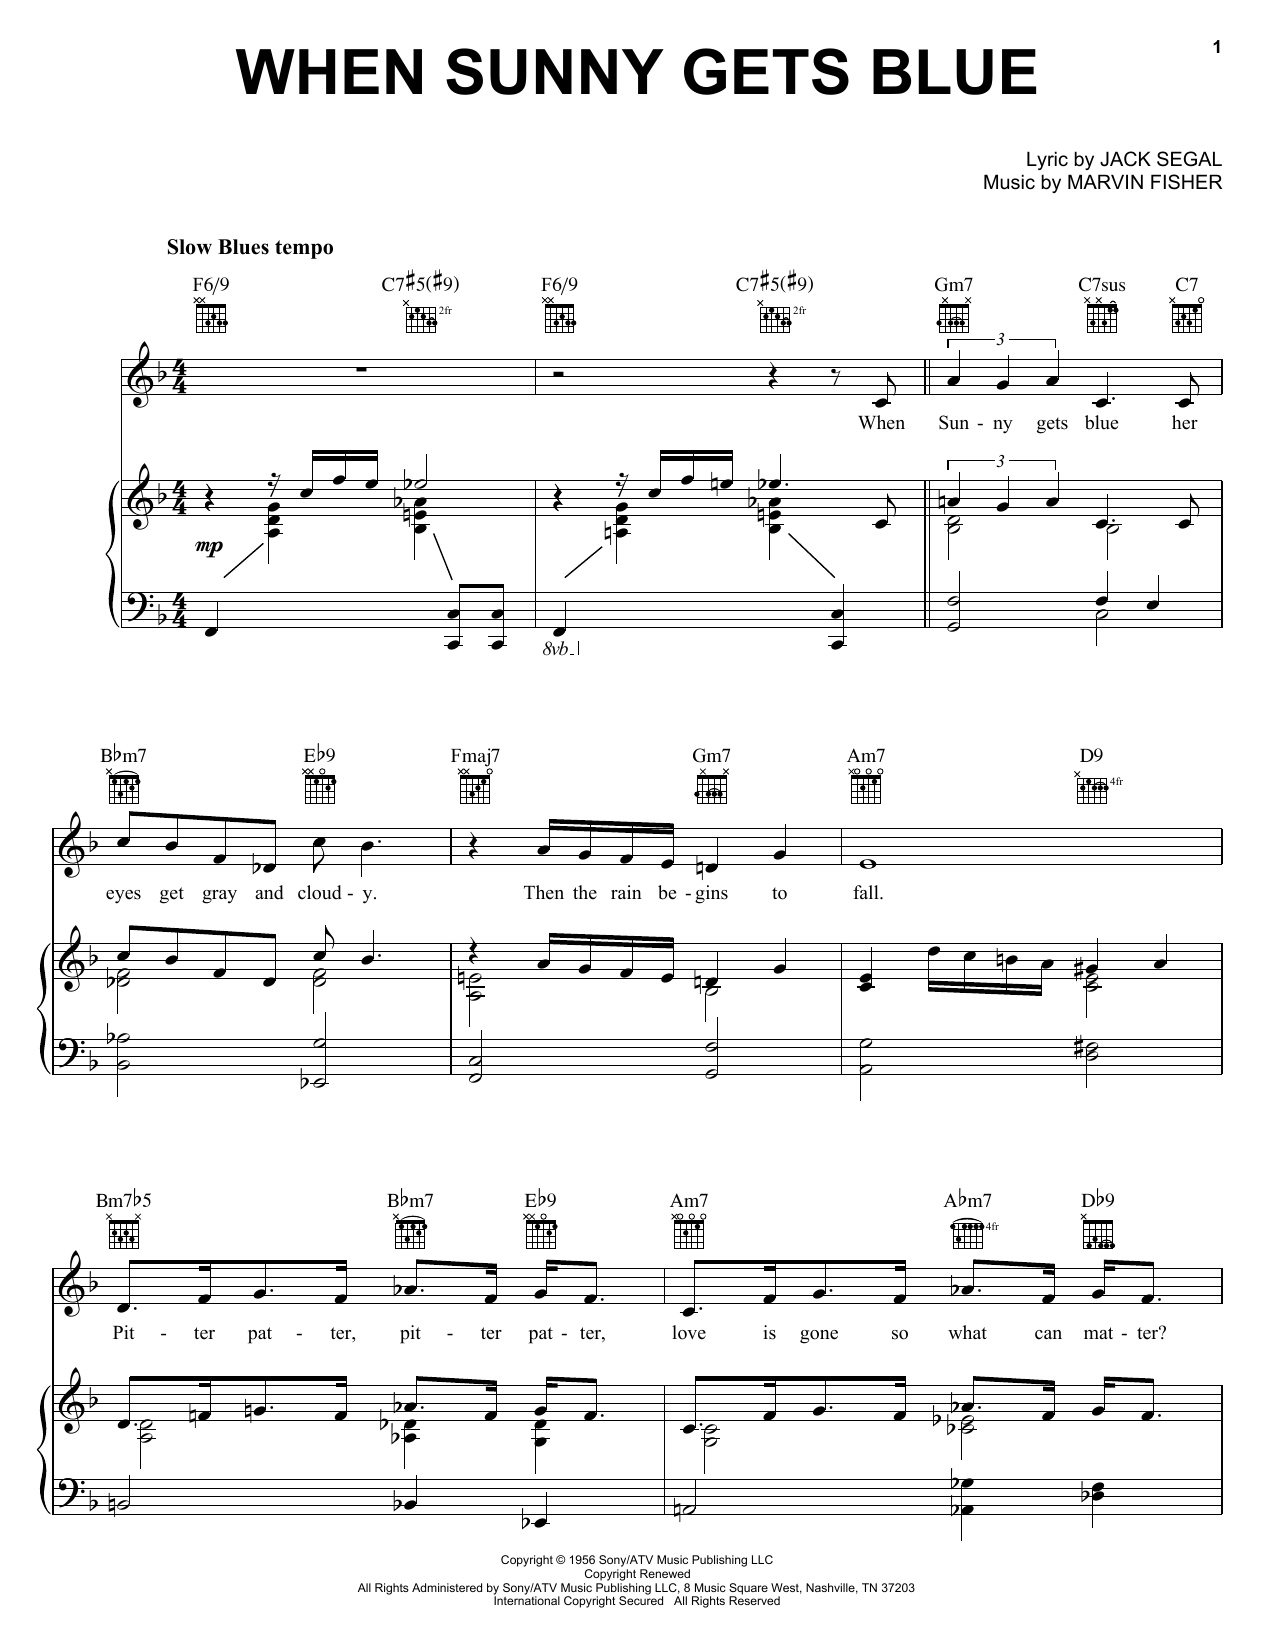 Jack Segal When Sunny Gets Blue sheet music notes and chords. Download Printable PDF.